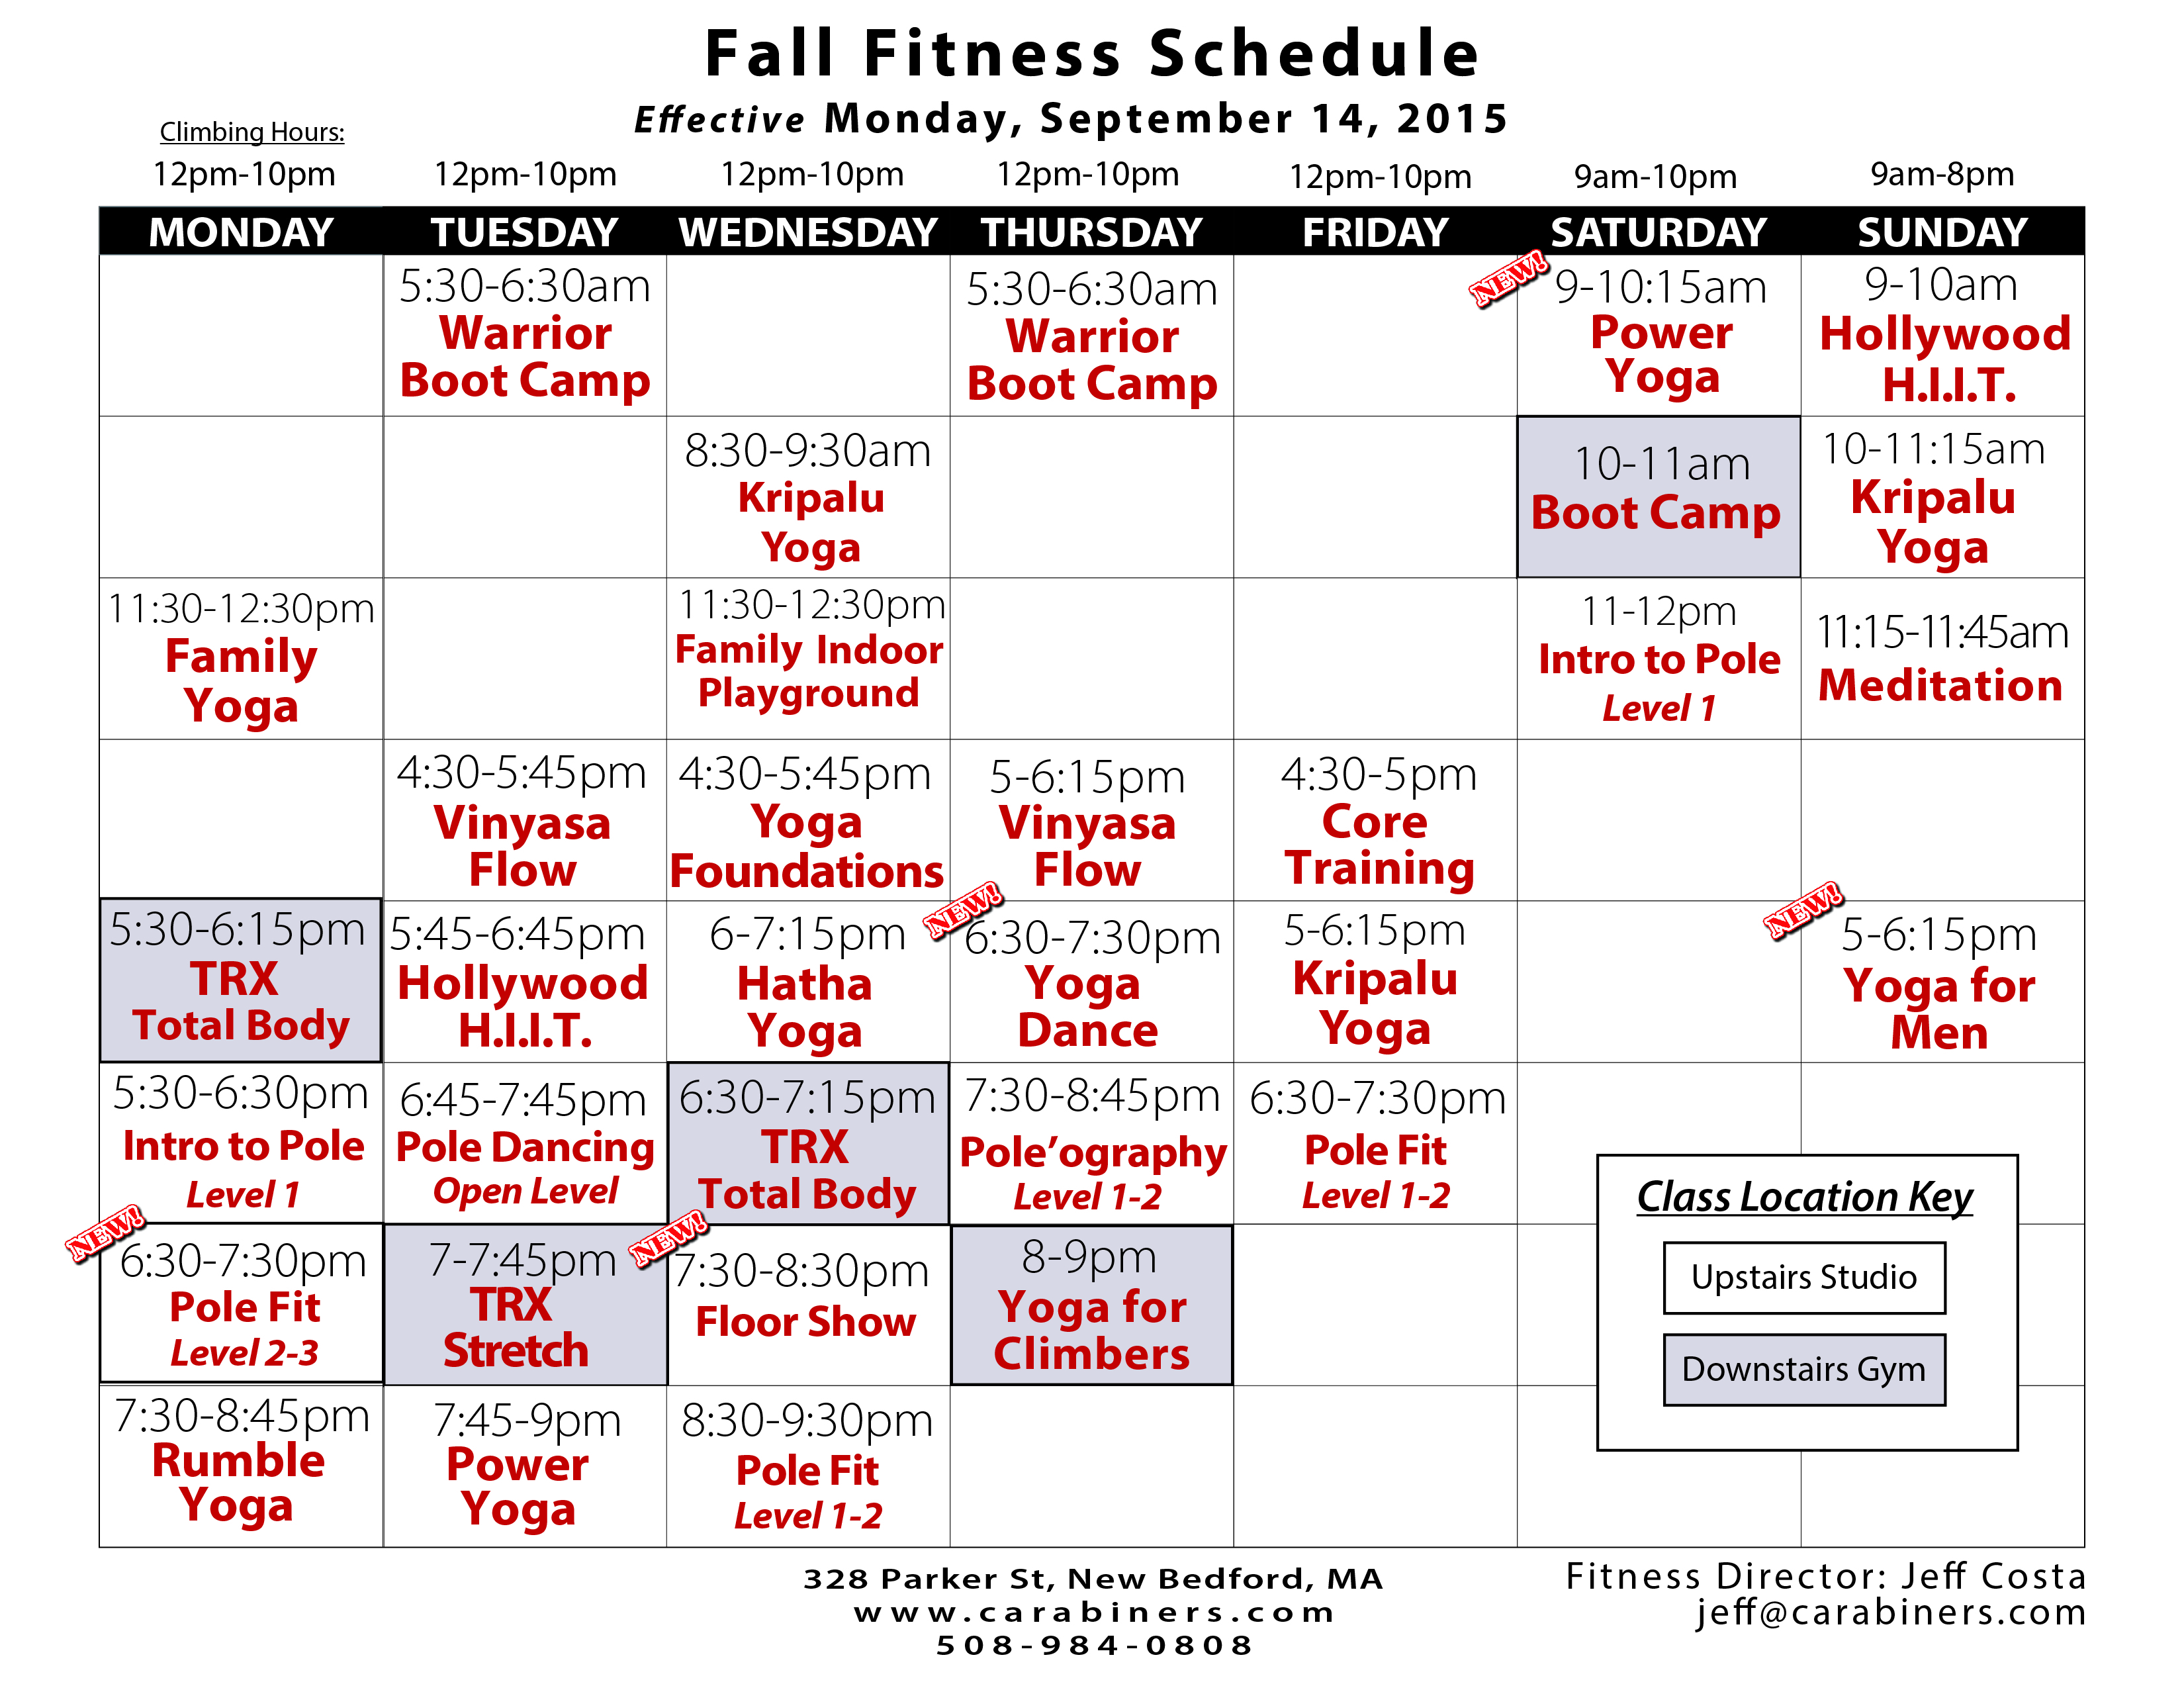 Fall fitness schedule 2015